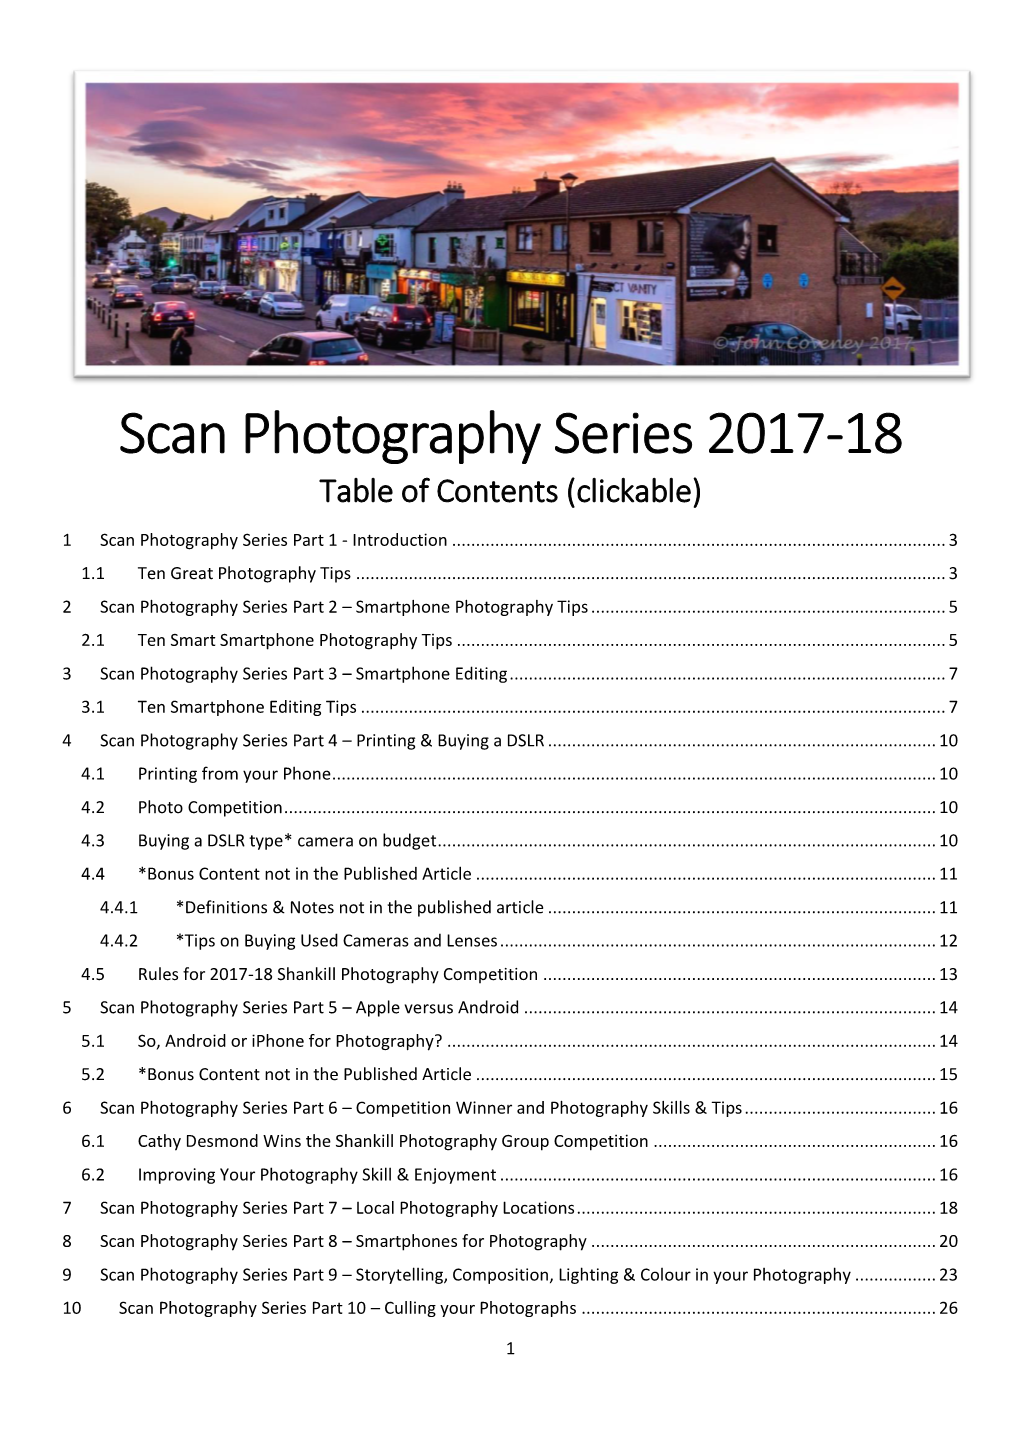 Scan Photography Series 2017-18 Table of Contents (Clickable)